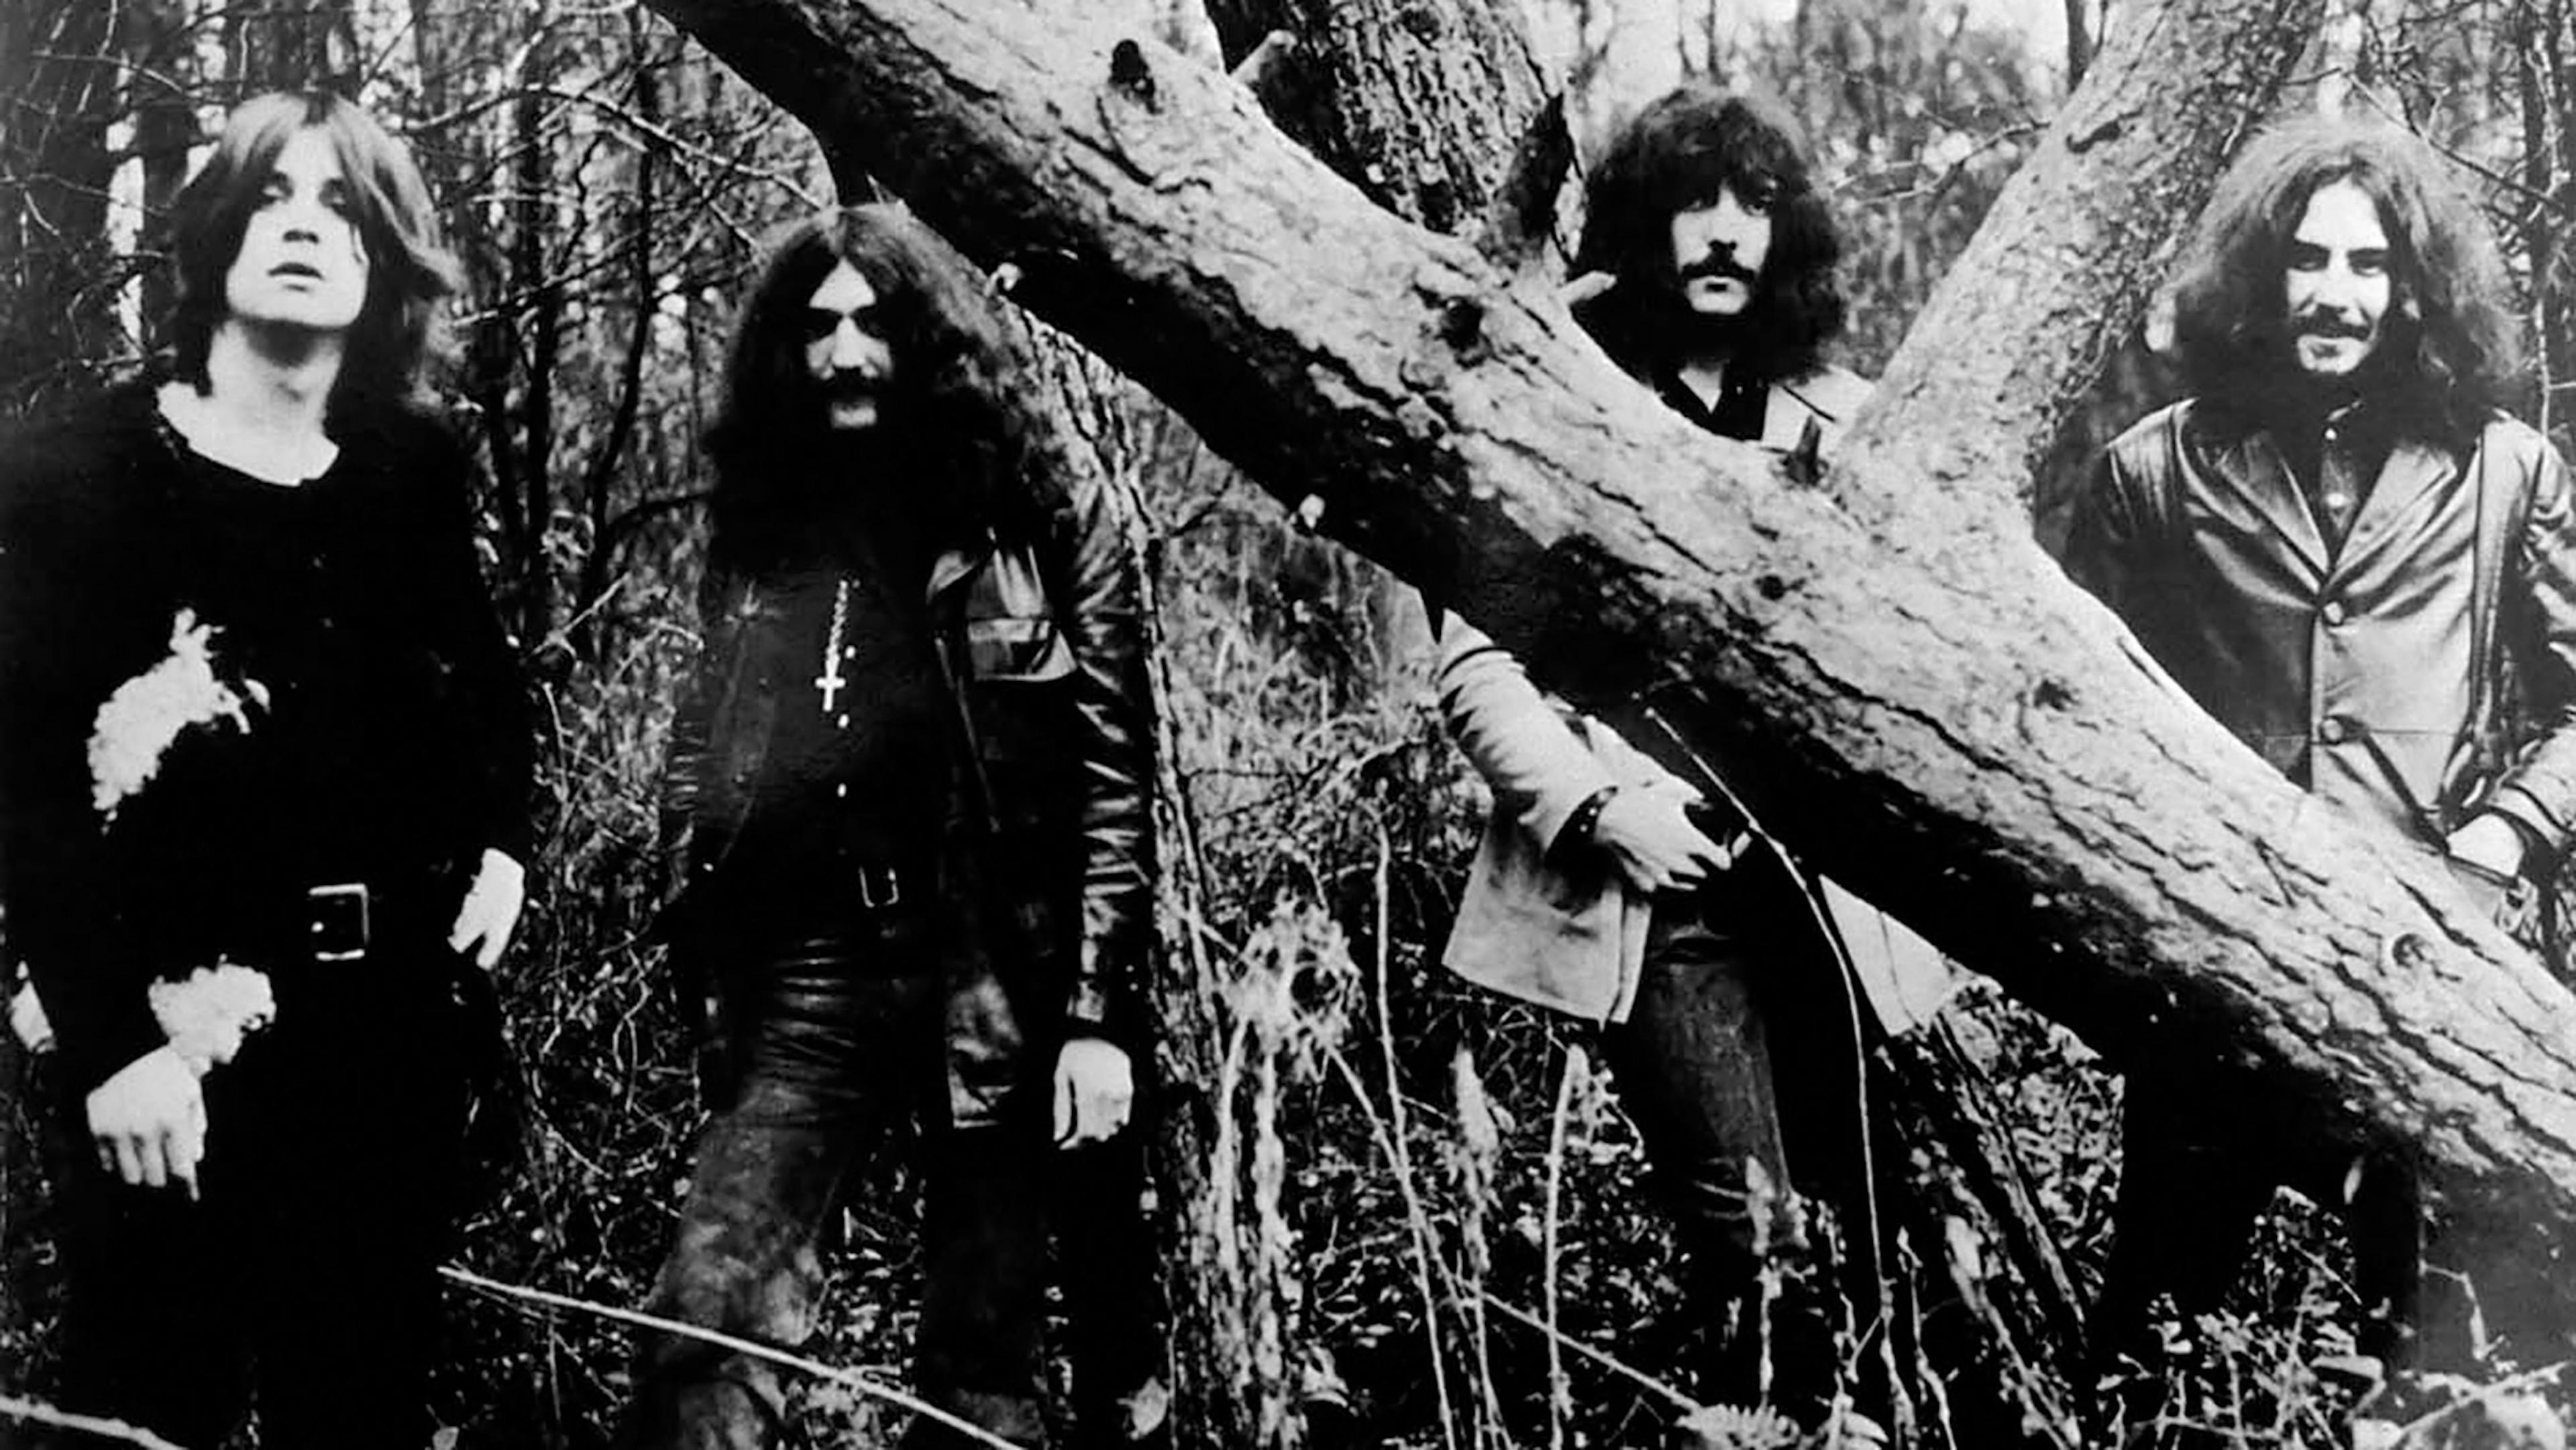 “It broke down barriers”: How Black Sabbath’s Paranoid changed the game